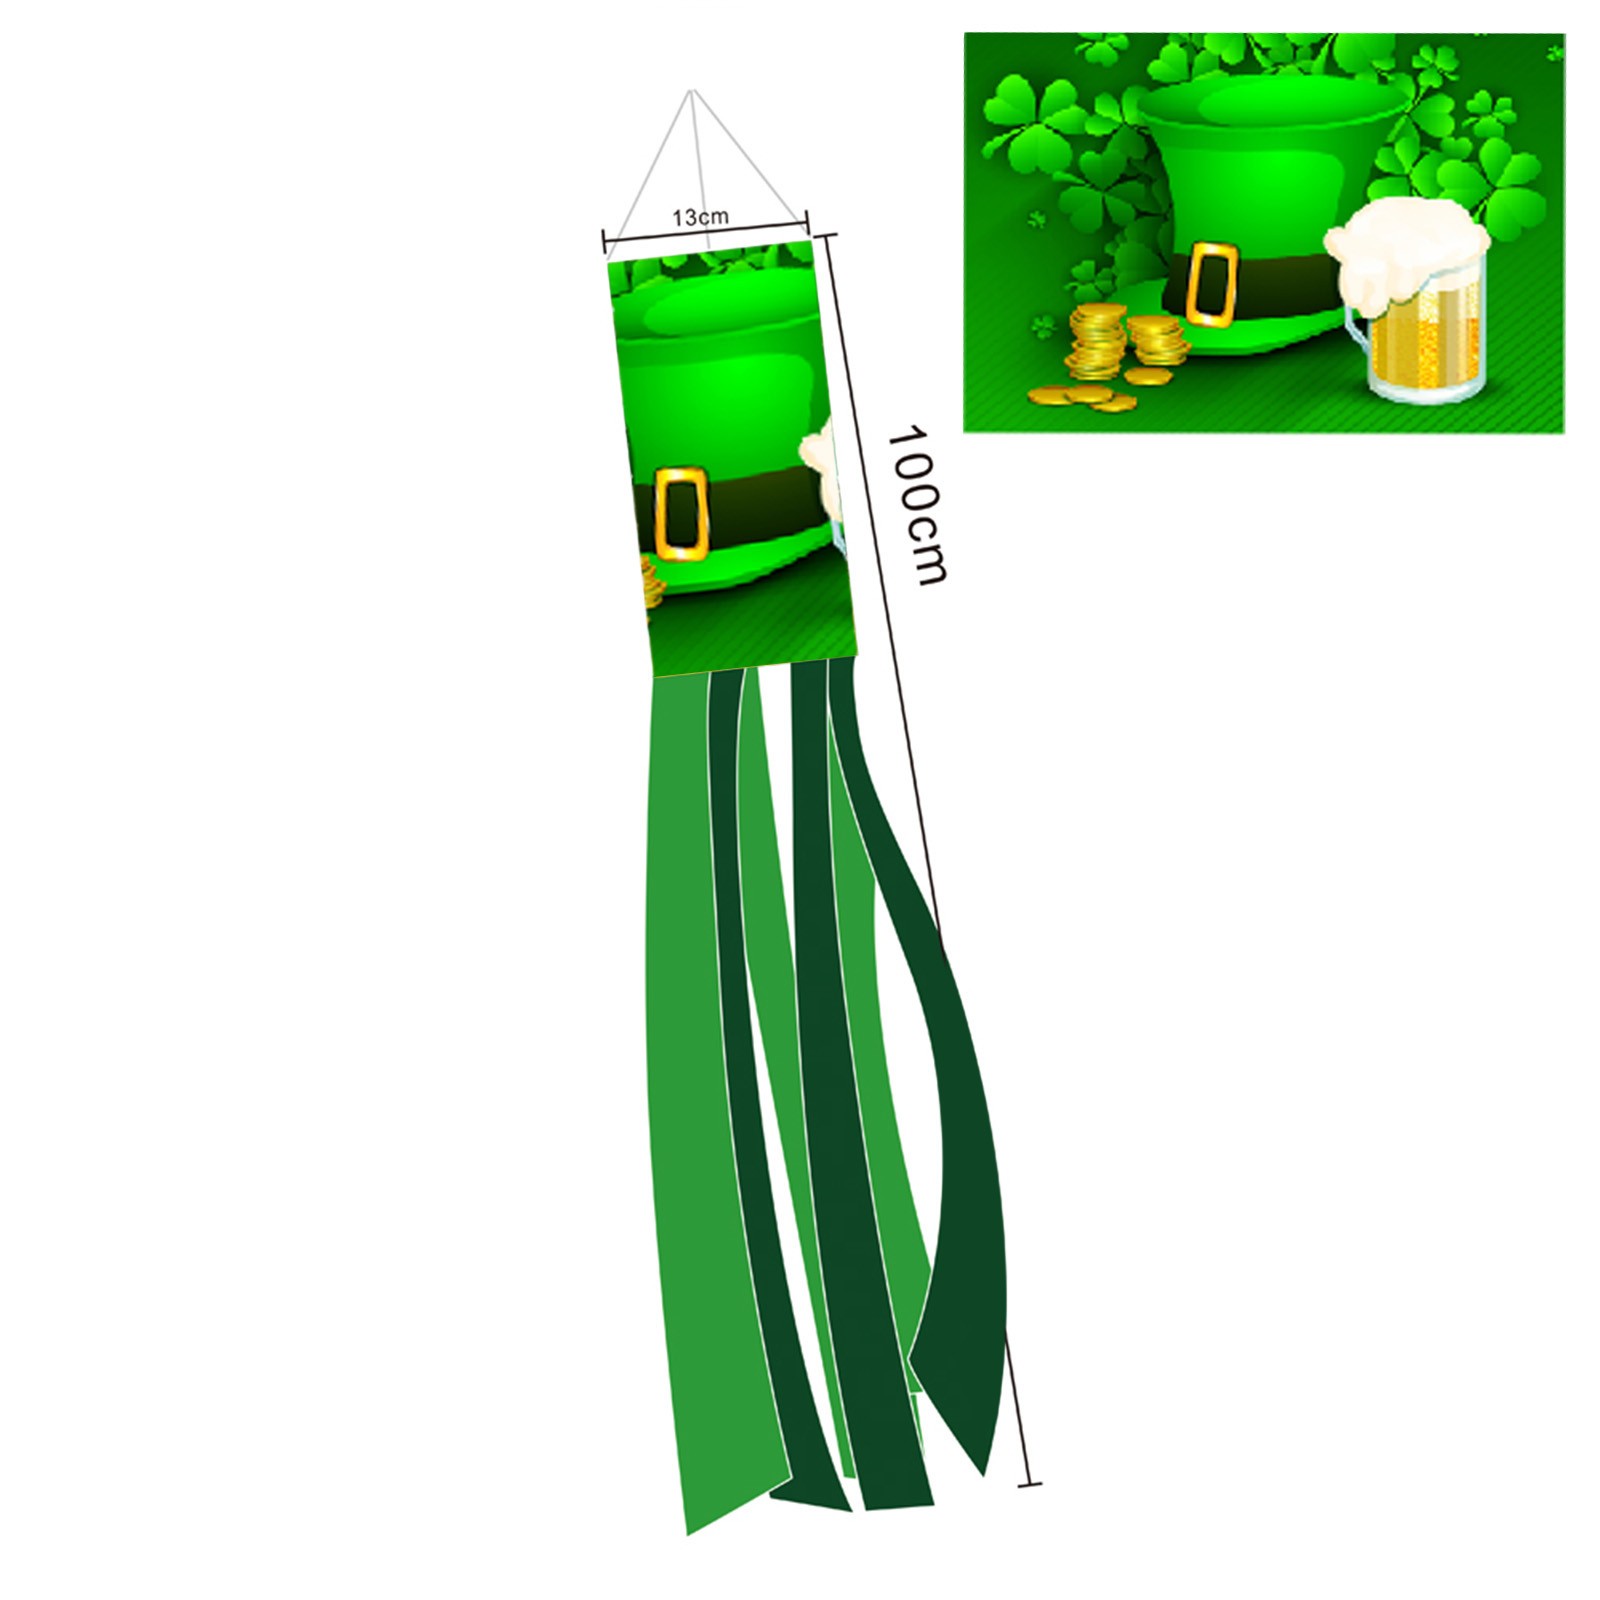 wofedyo home decor st. patrick's day windsock polyester garden windsock lawn garden party deco bathroom decor wall decor - image 1 of 4